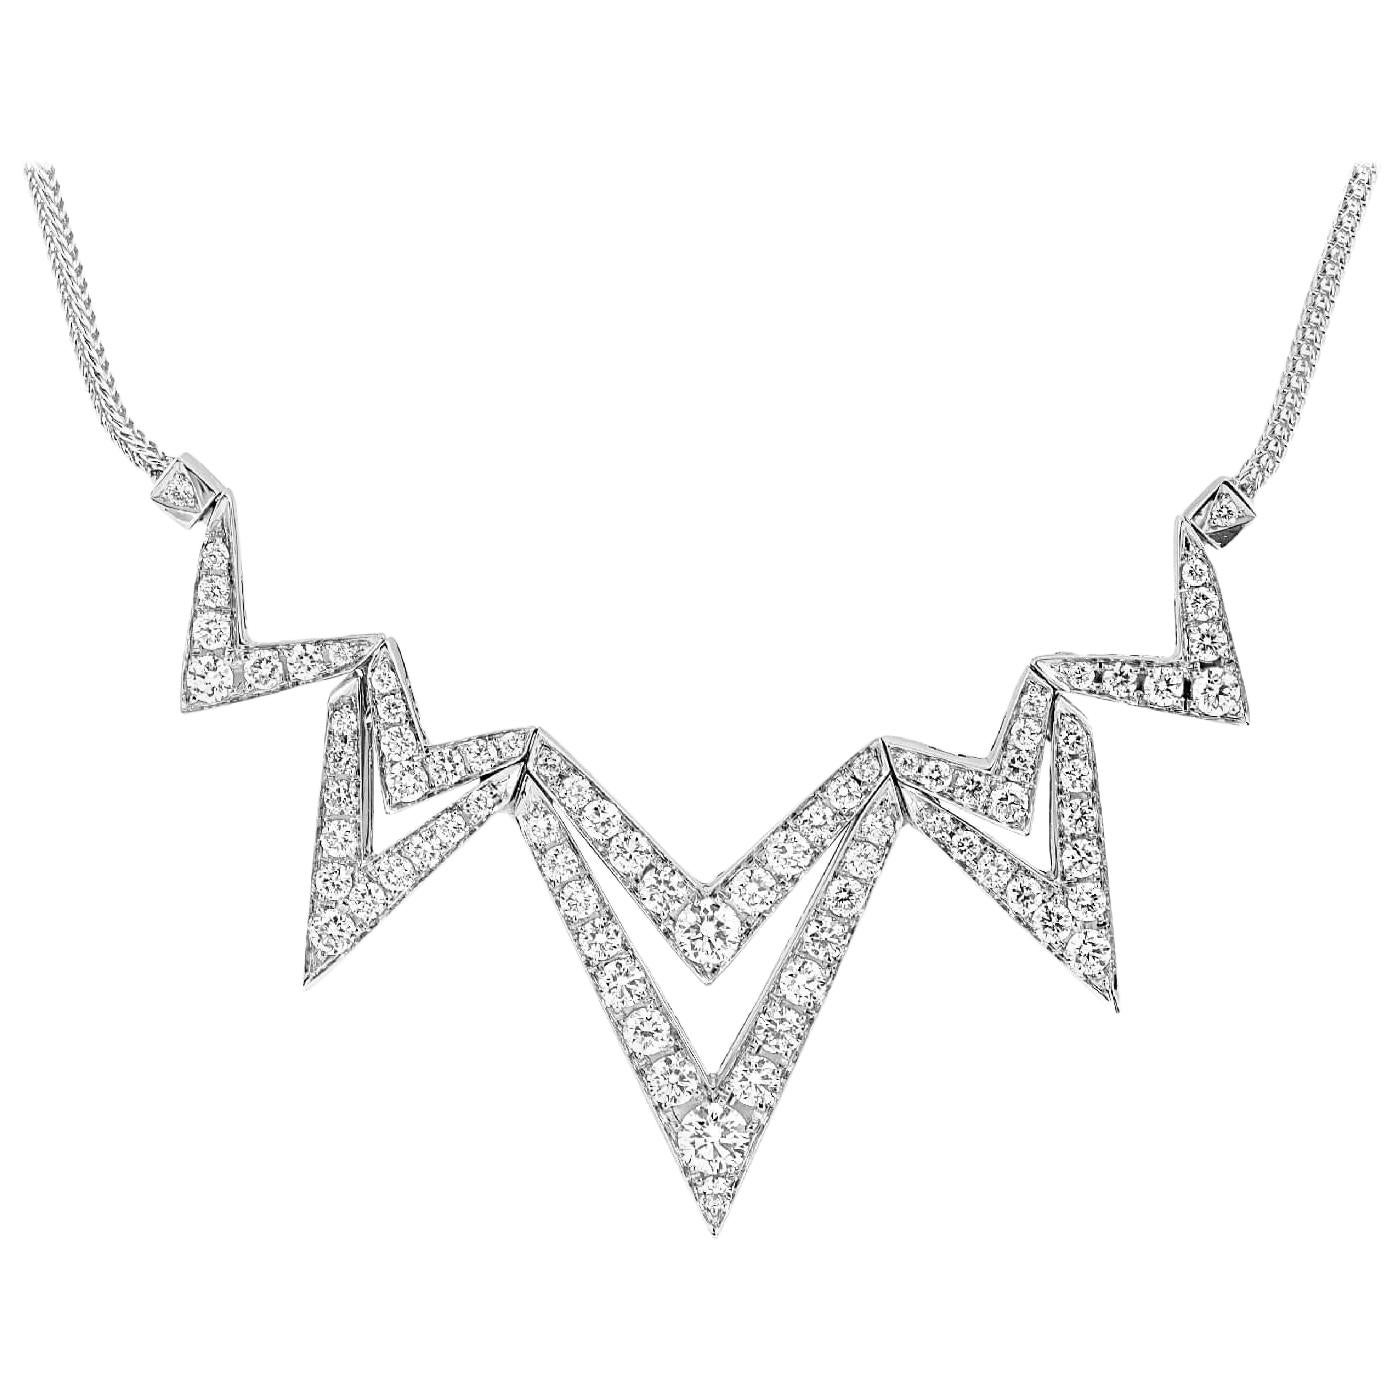 Stephen Webster Lady Stardust 18 Carat White Gold and White Diamonds Necklace